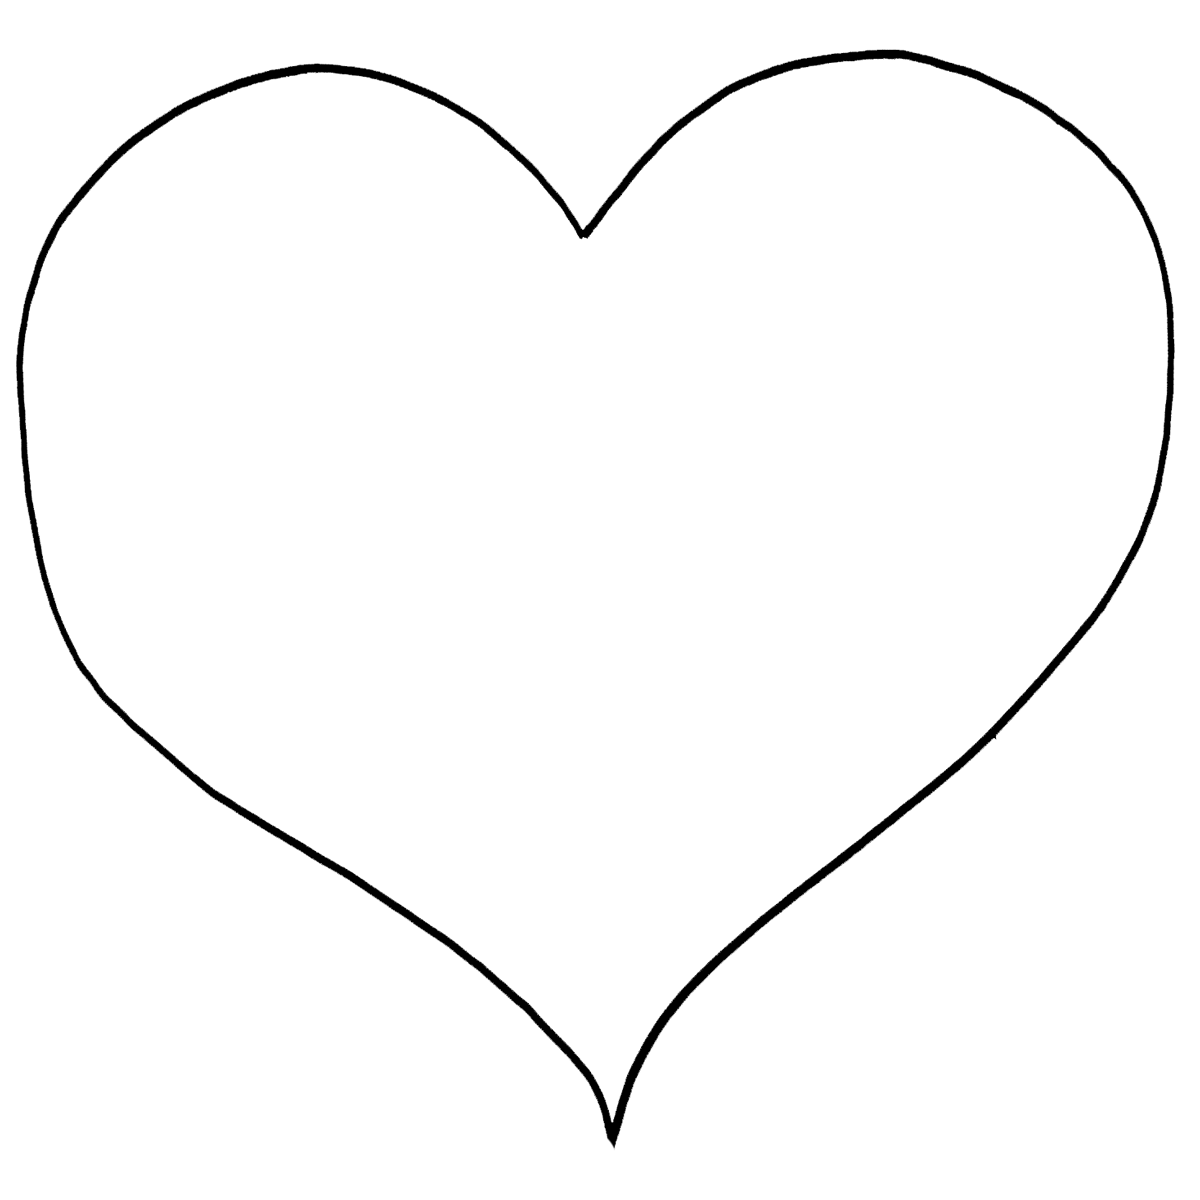 Download Free Printable Heart Coloring Pages For Kids